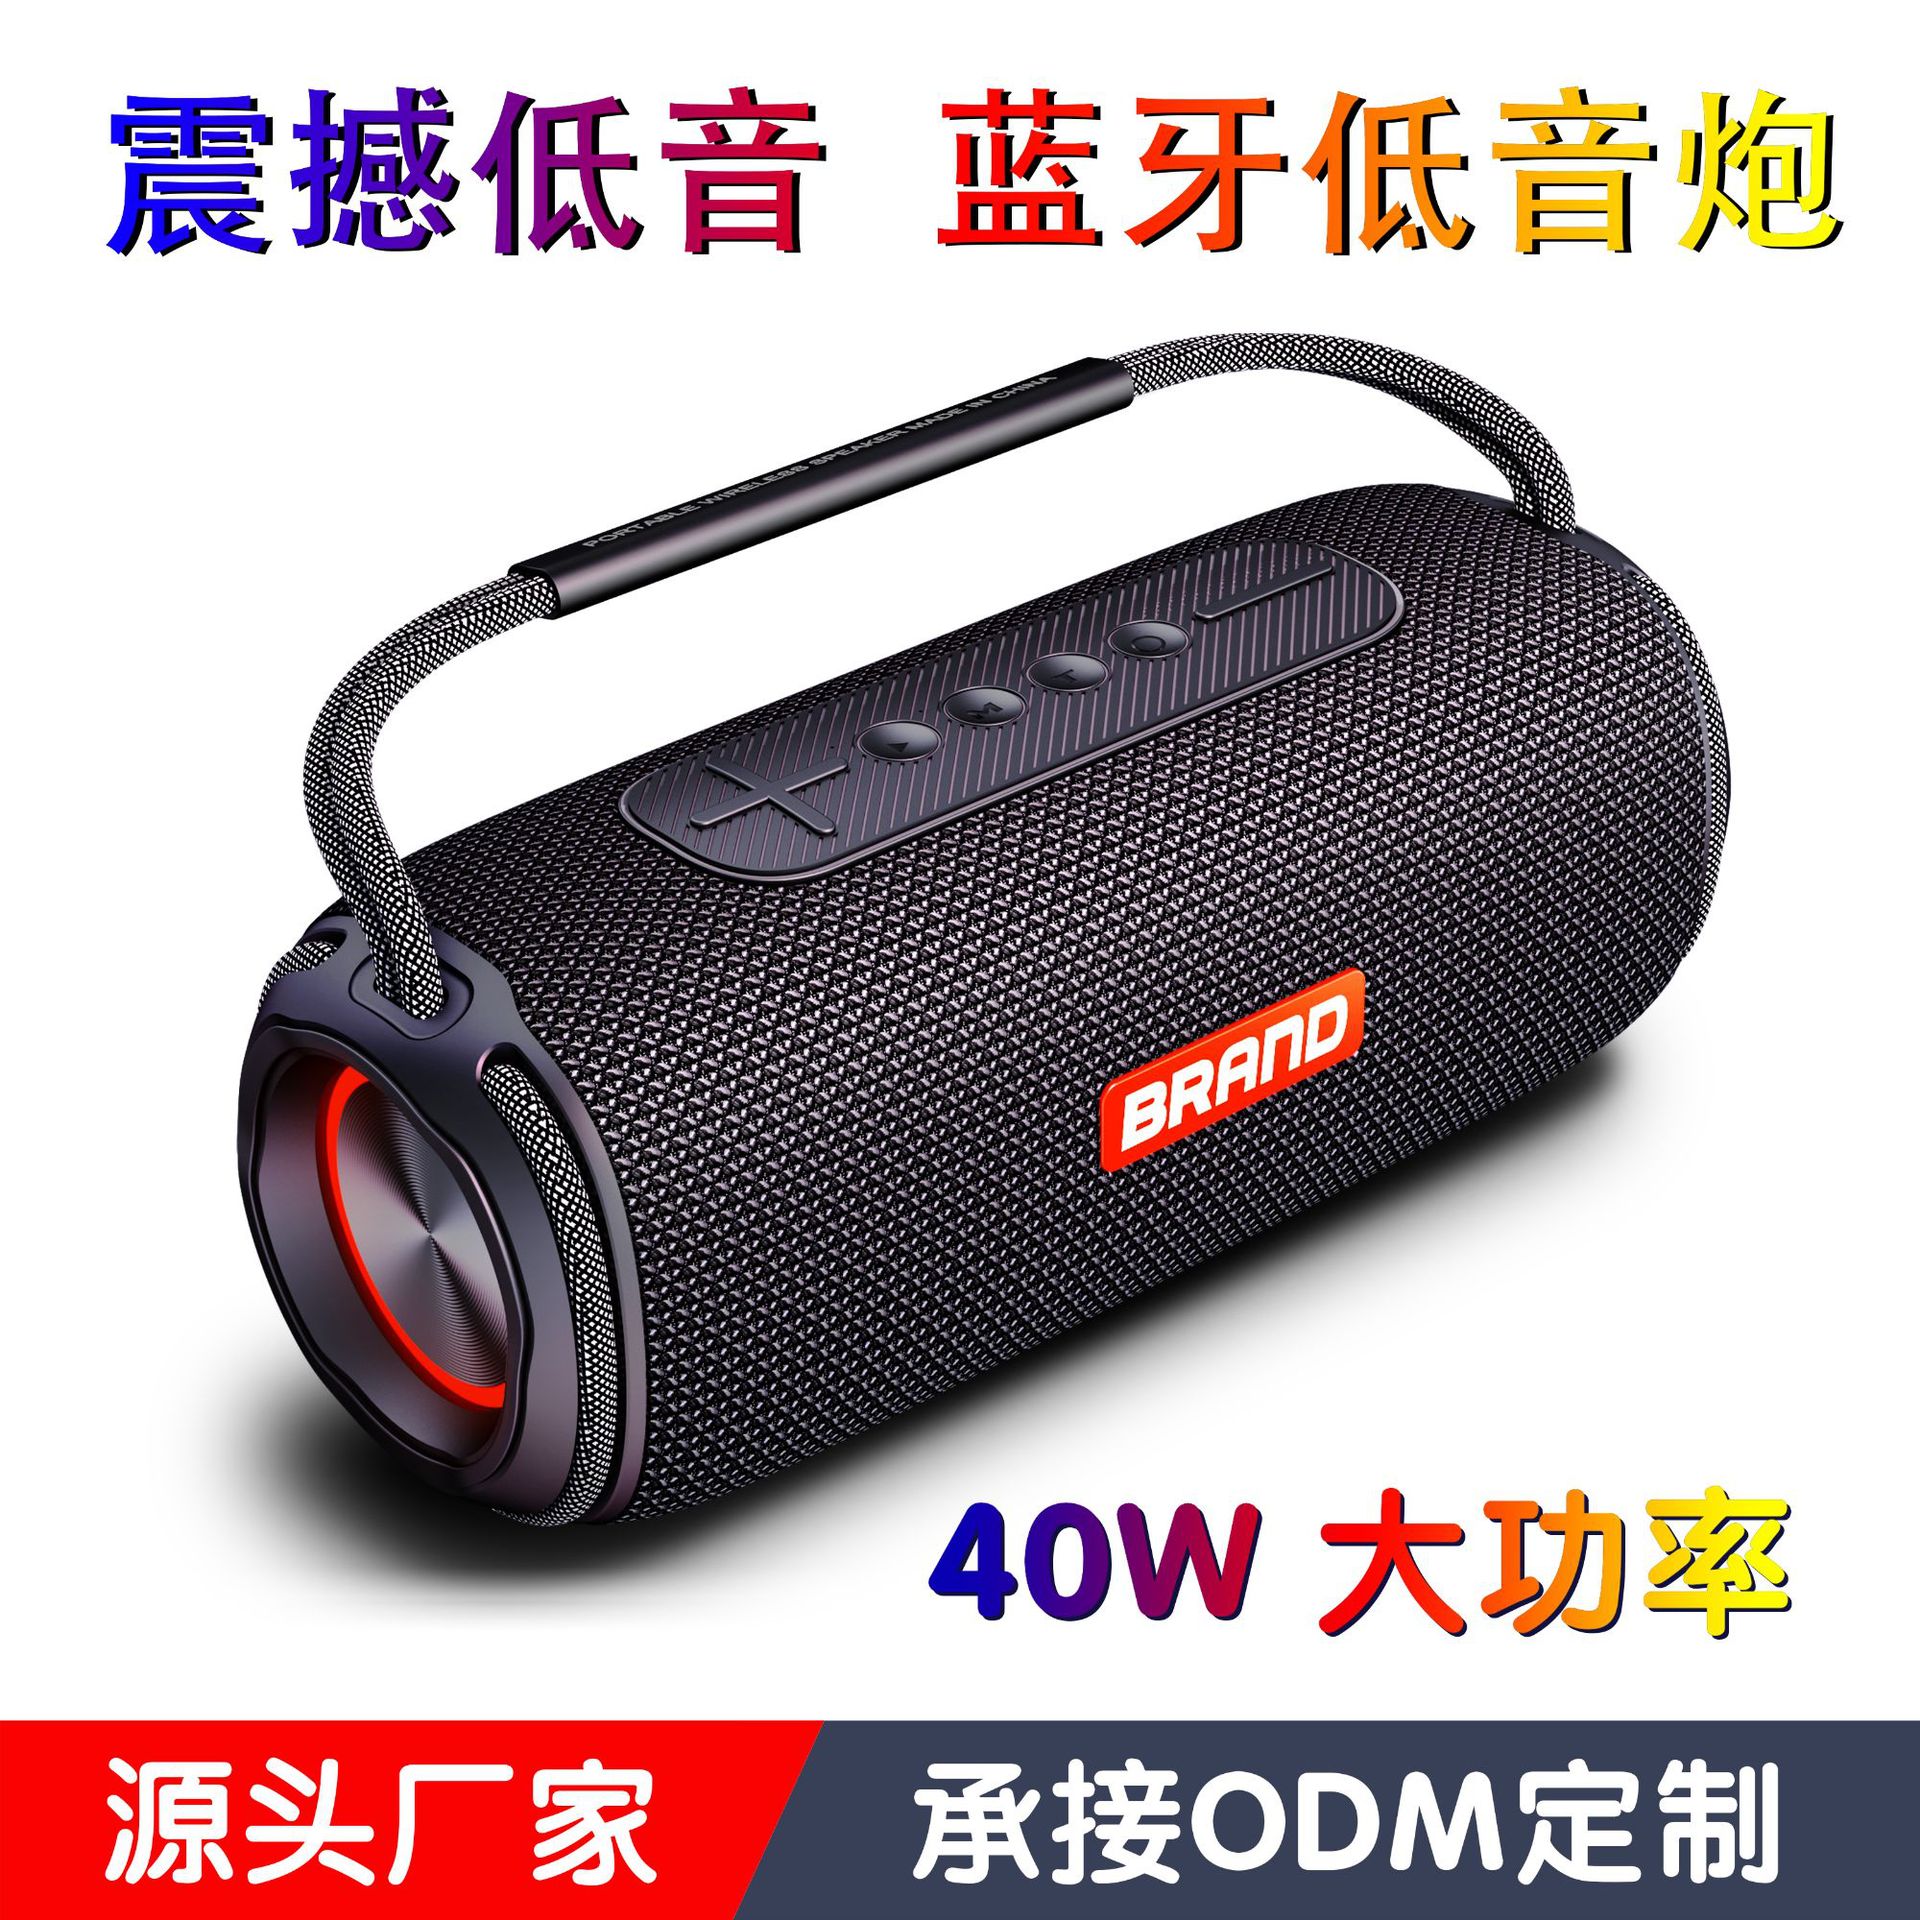 New 40W Wireless Bluetooth Speaker Large Volume Outdoor Sports Portable Audio Dual Speaker High Power Subwoofer